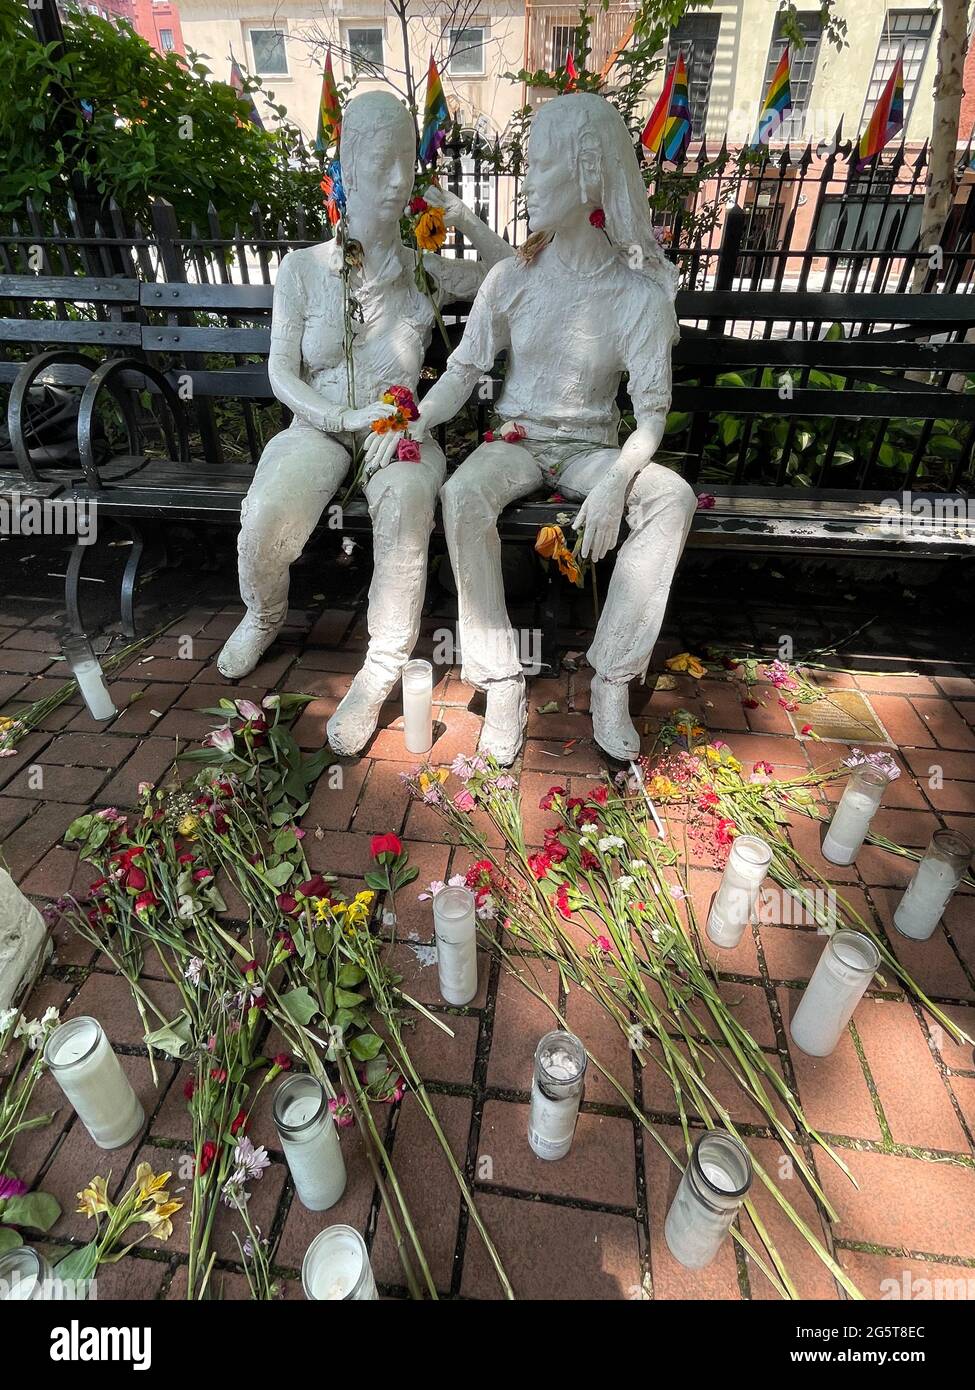 George Segal's The Gay Liberation statue is part of the Stonewall National Monument in Christopher Park across from the Stonewall Inn, New York, NY Stock Photo